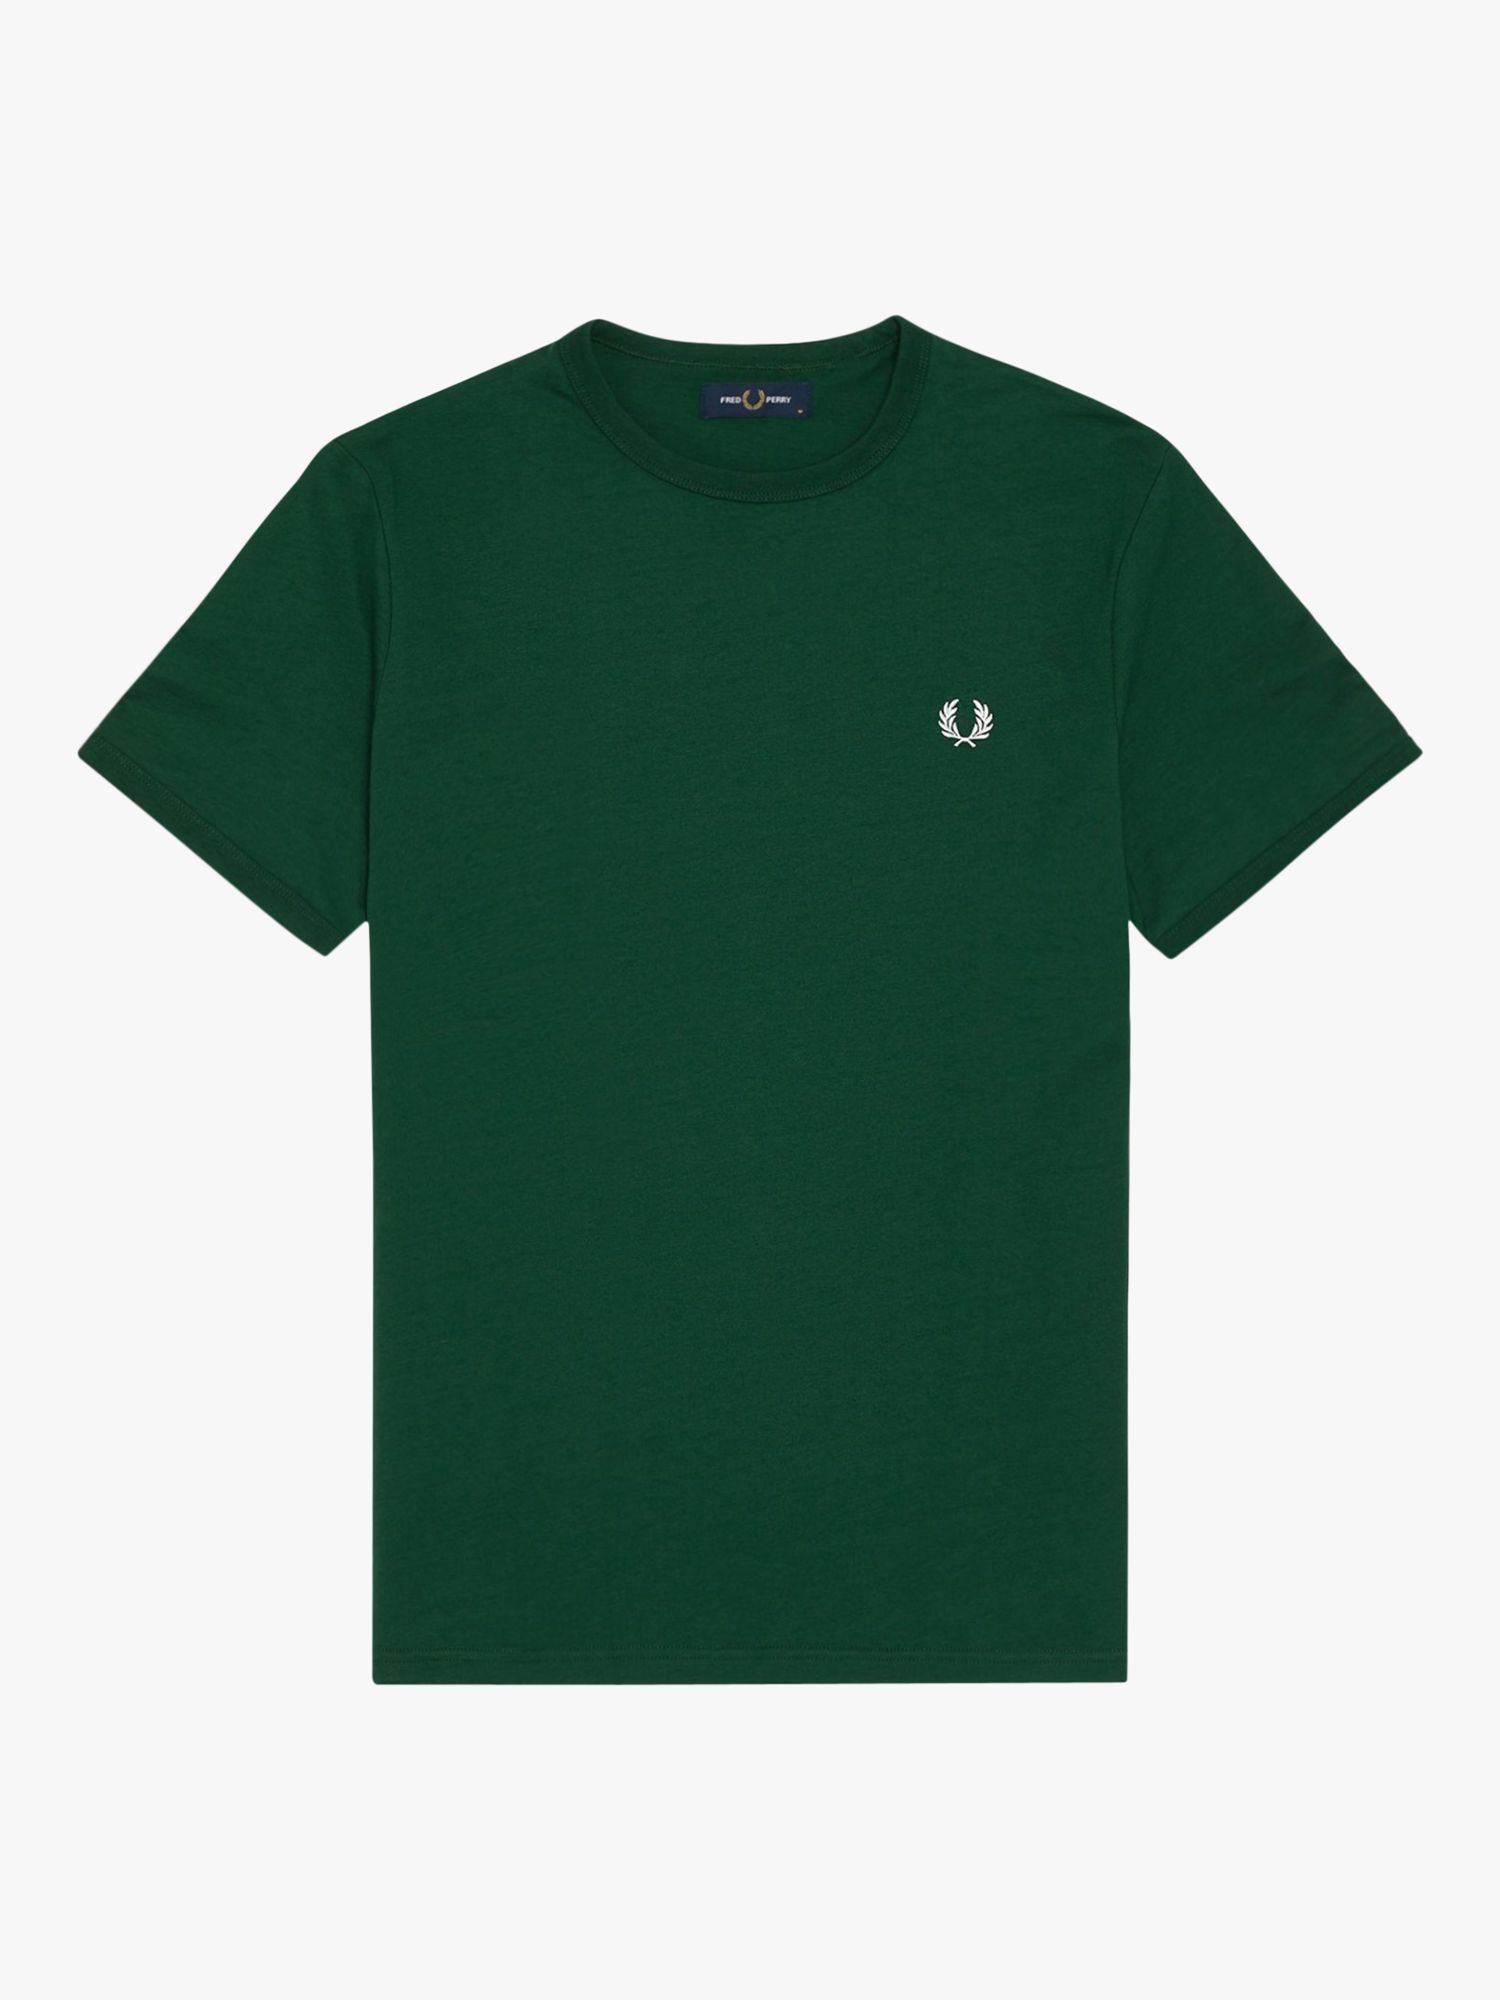 Fred Perry Ringer Crew Neck T-Shirt, Ivy/White at John Lewis & Partners